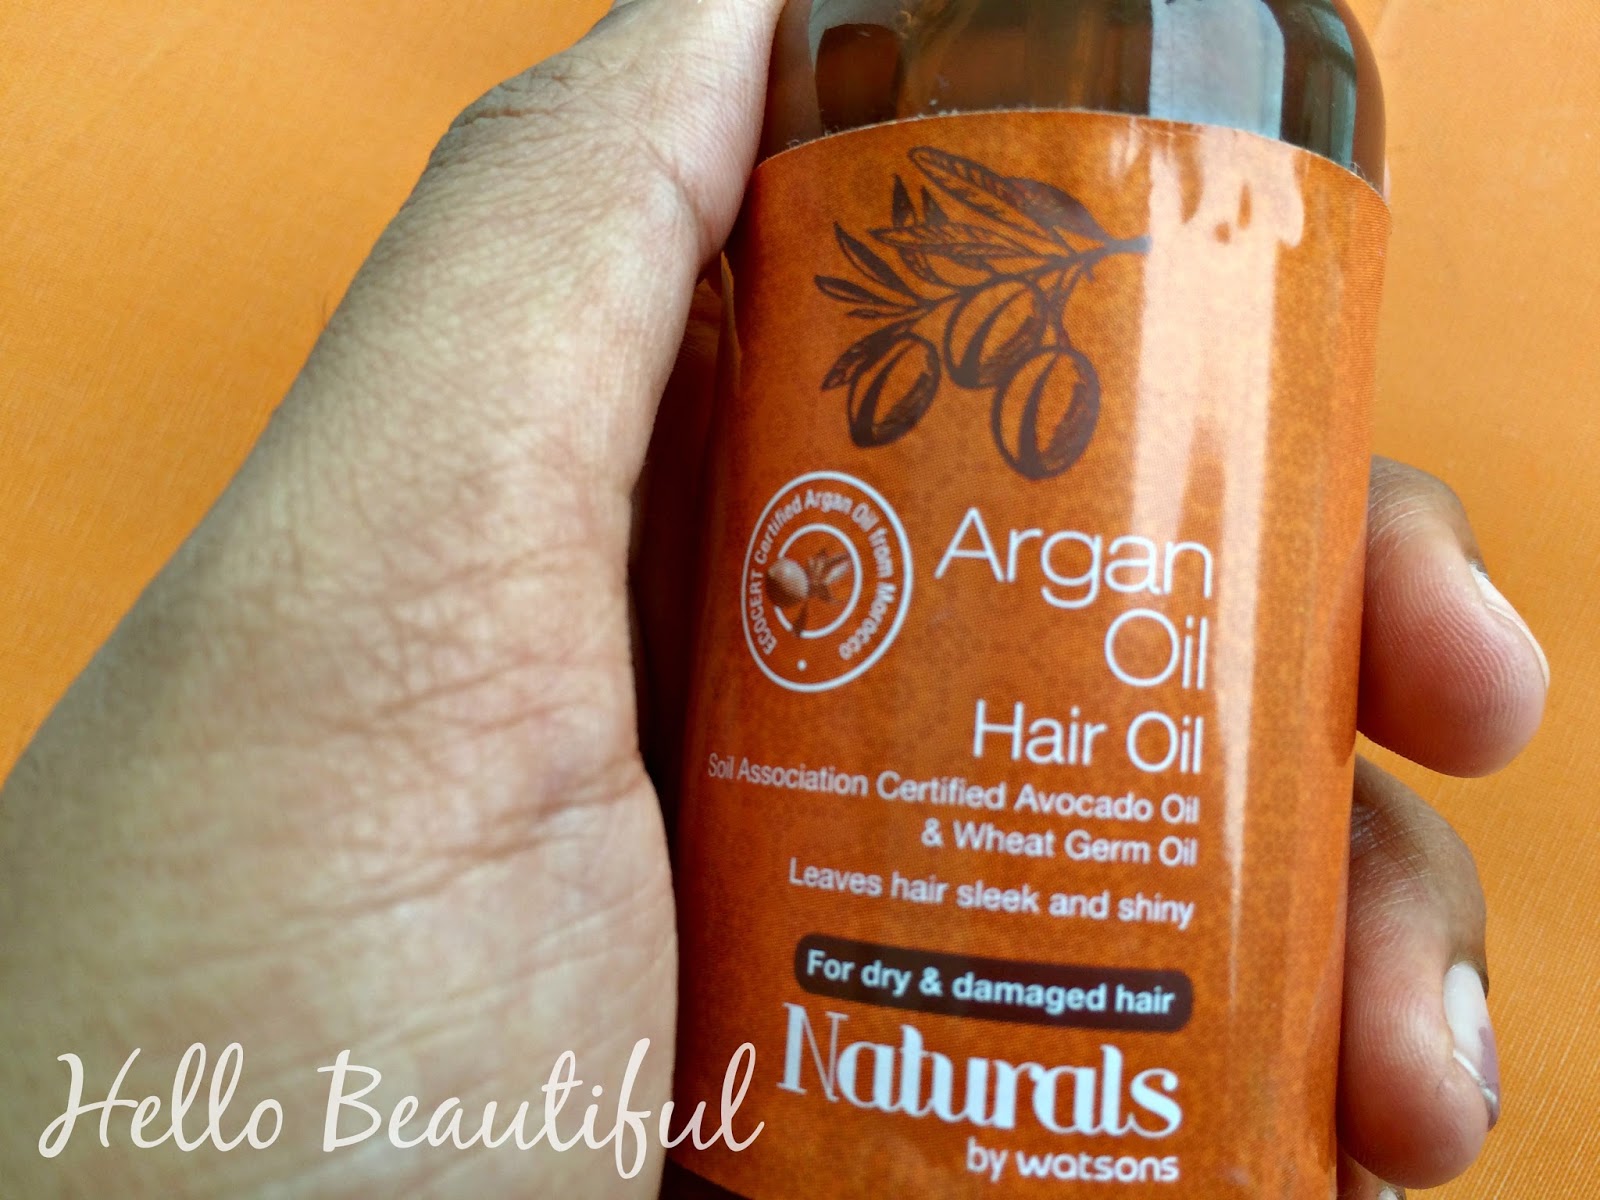 Watsons' Naturals Argon Oil Hair Oil, Hair Mask and Body Scrub Review - All  About Beauty